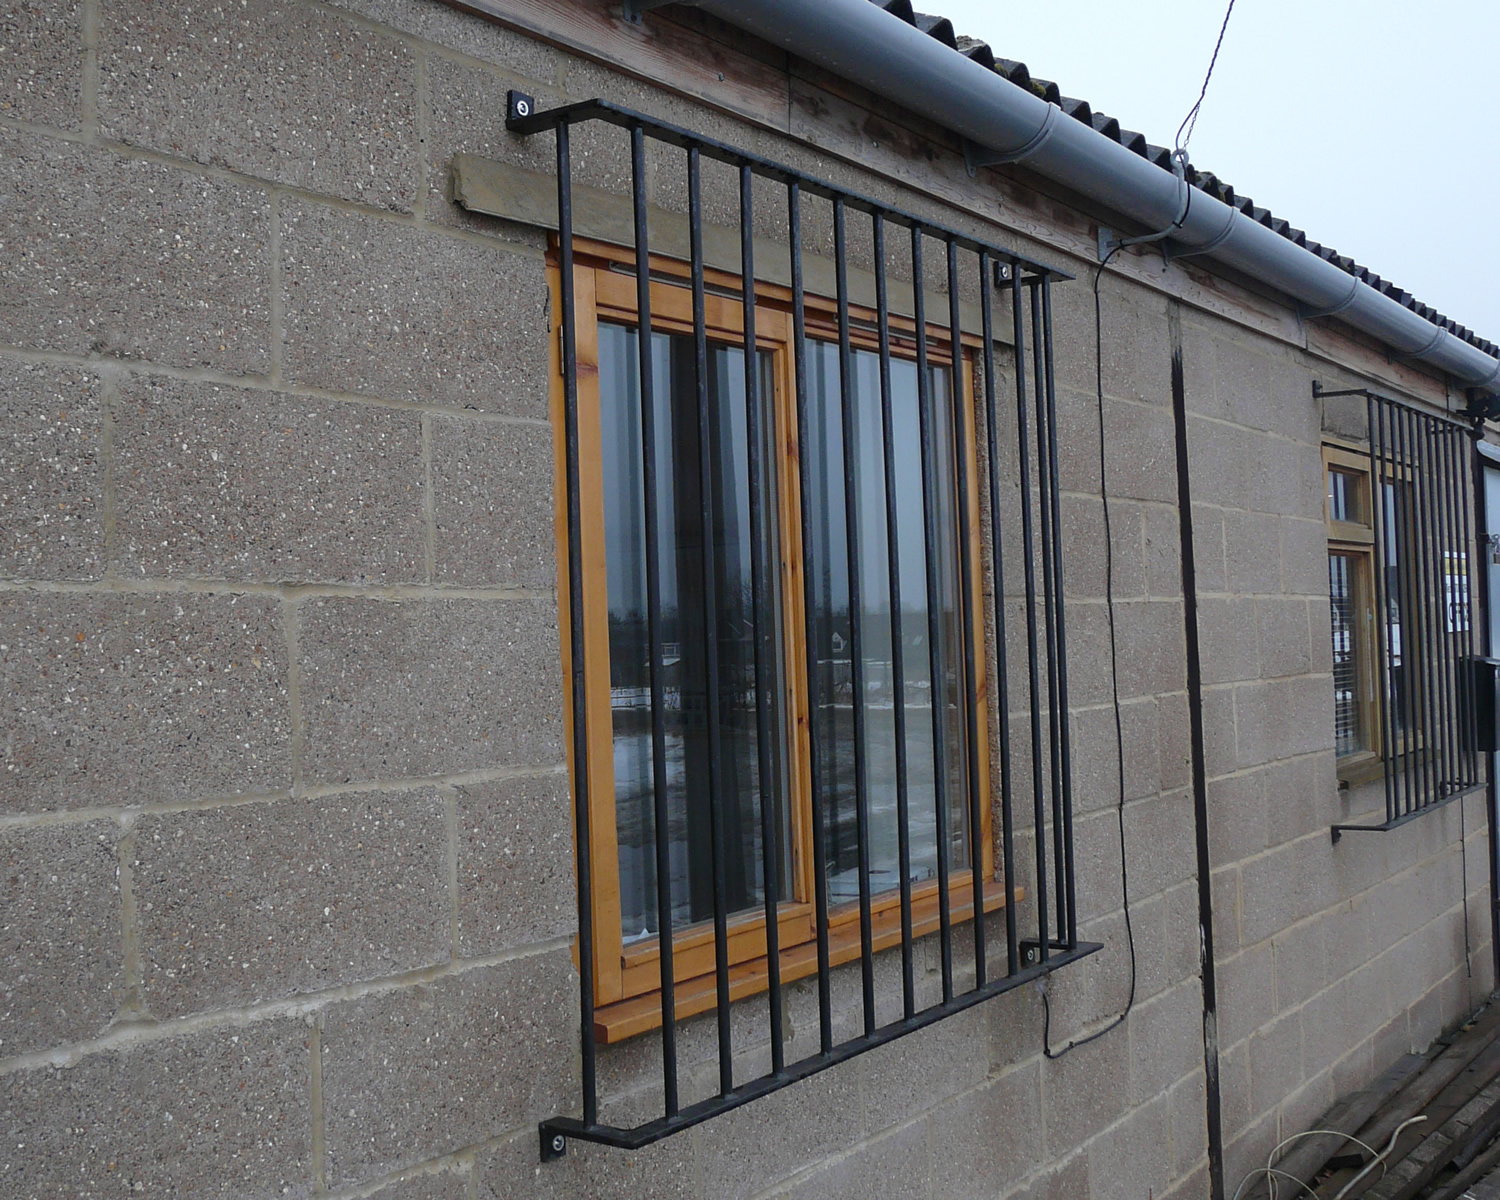 Metal security grilles for windows